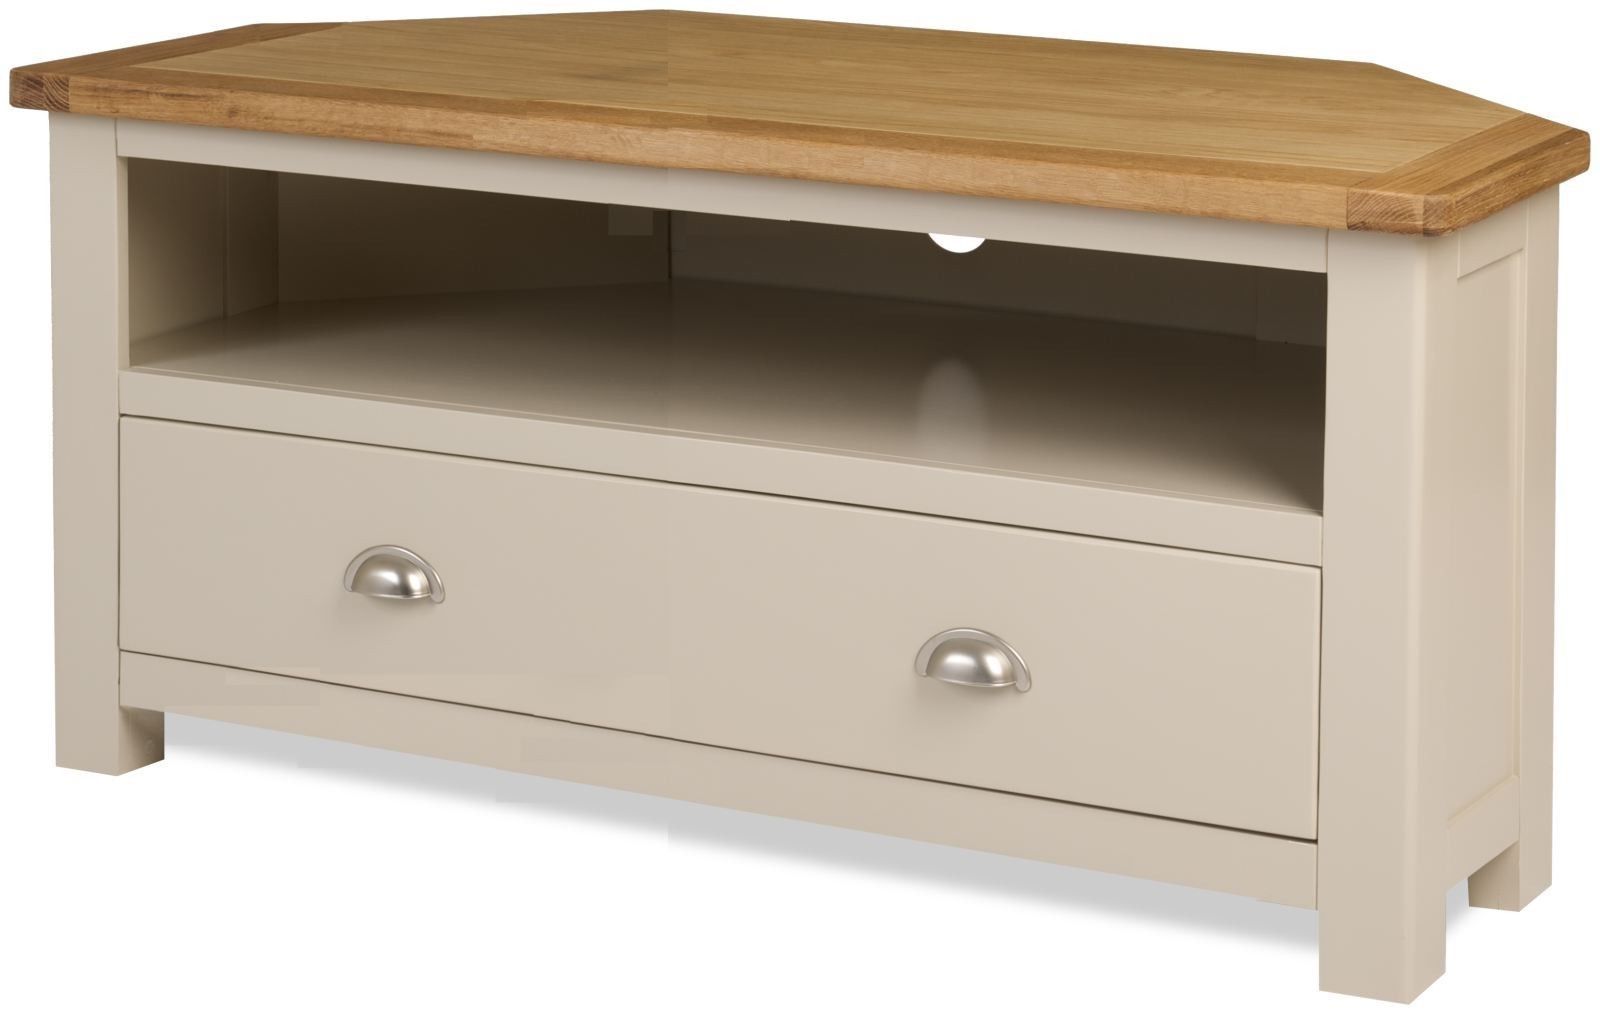 Corner Wood Tv Stand Melton Stone Colour Painted – Furnish Ideas Intended For Most Popular Painted Corner Tv Cabinets (View 2 of 20)